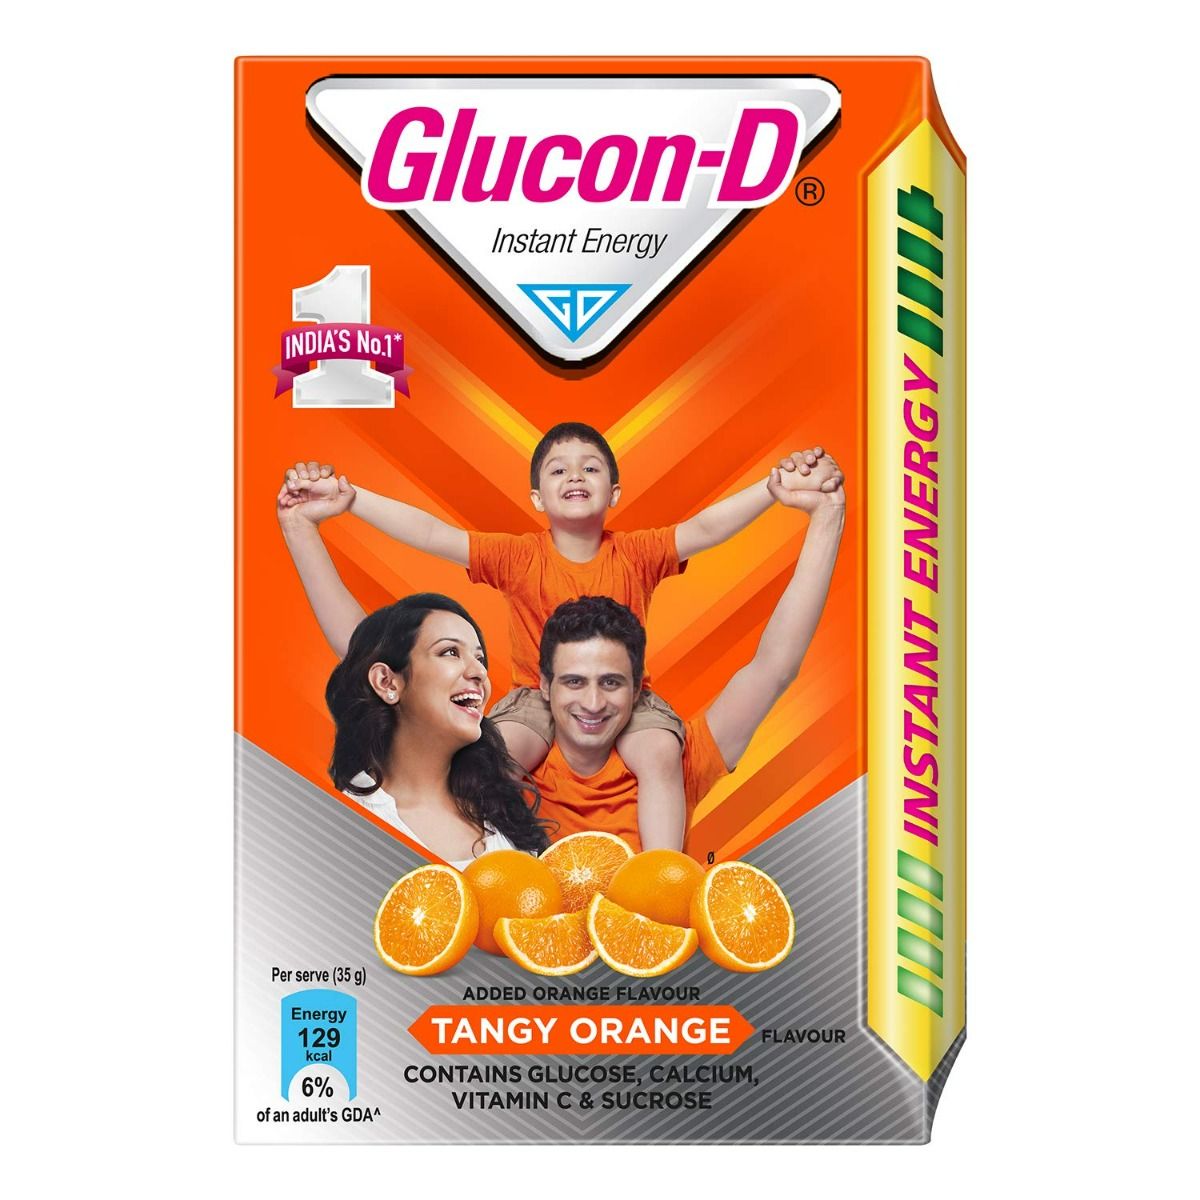 Glucon-D Instant Energy Tangy Orange Flavour Powder, 450 gm, Pack of 1 